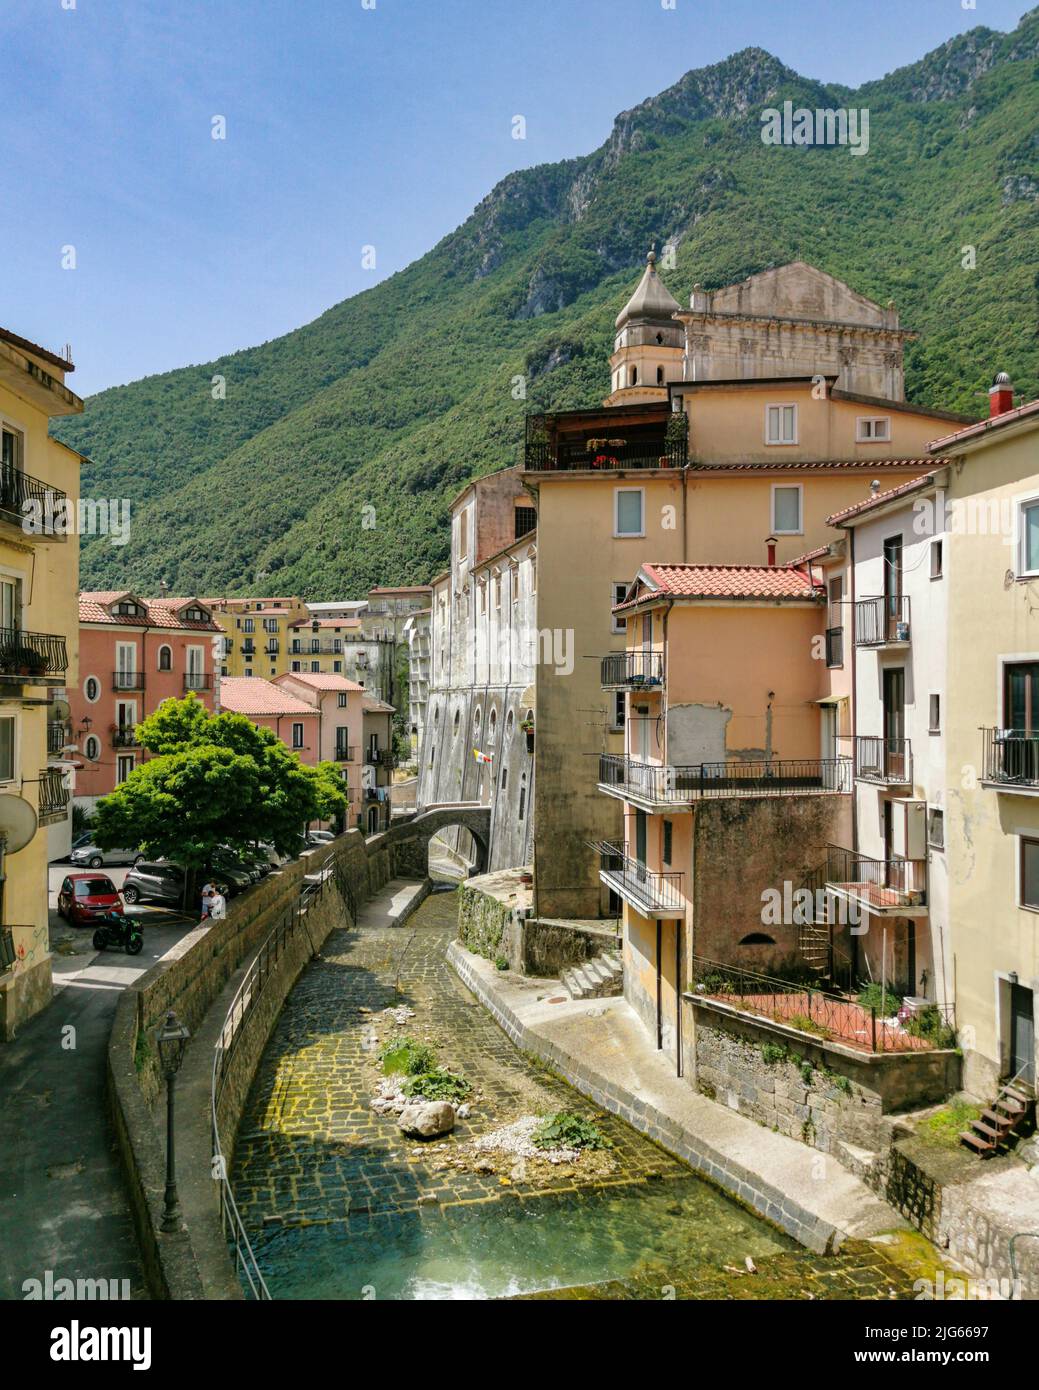 View of Campagna, a typical historical town in Salerno province, Campania, Italy Stock Photo